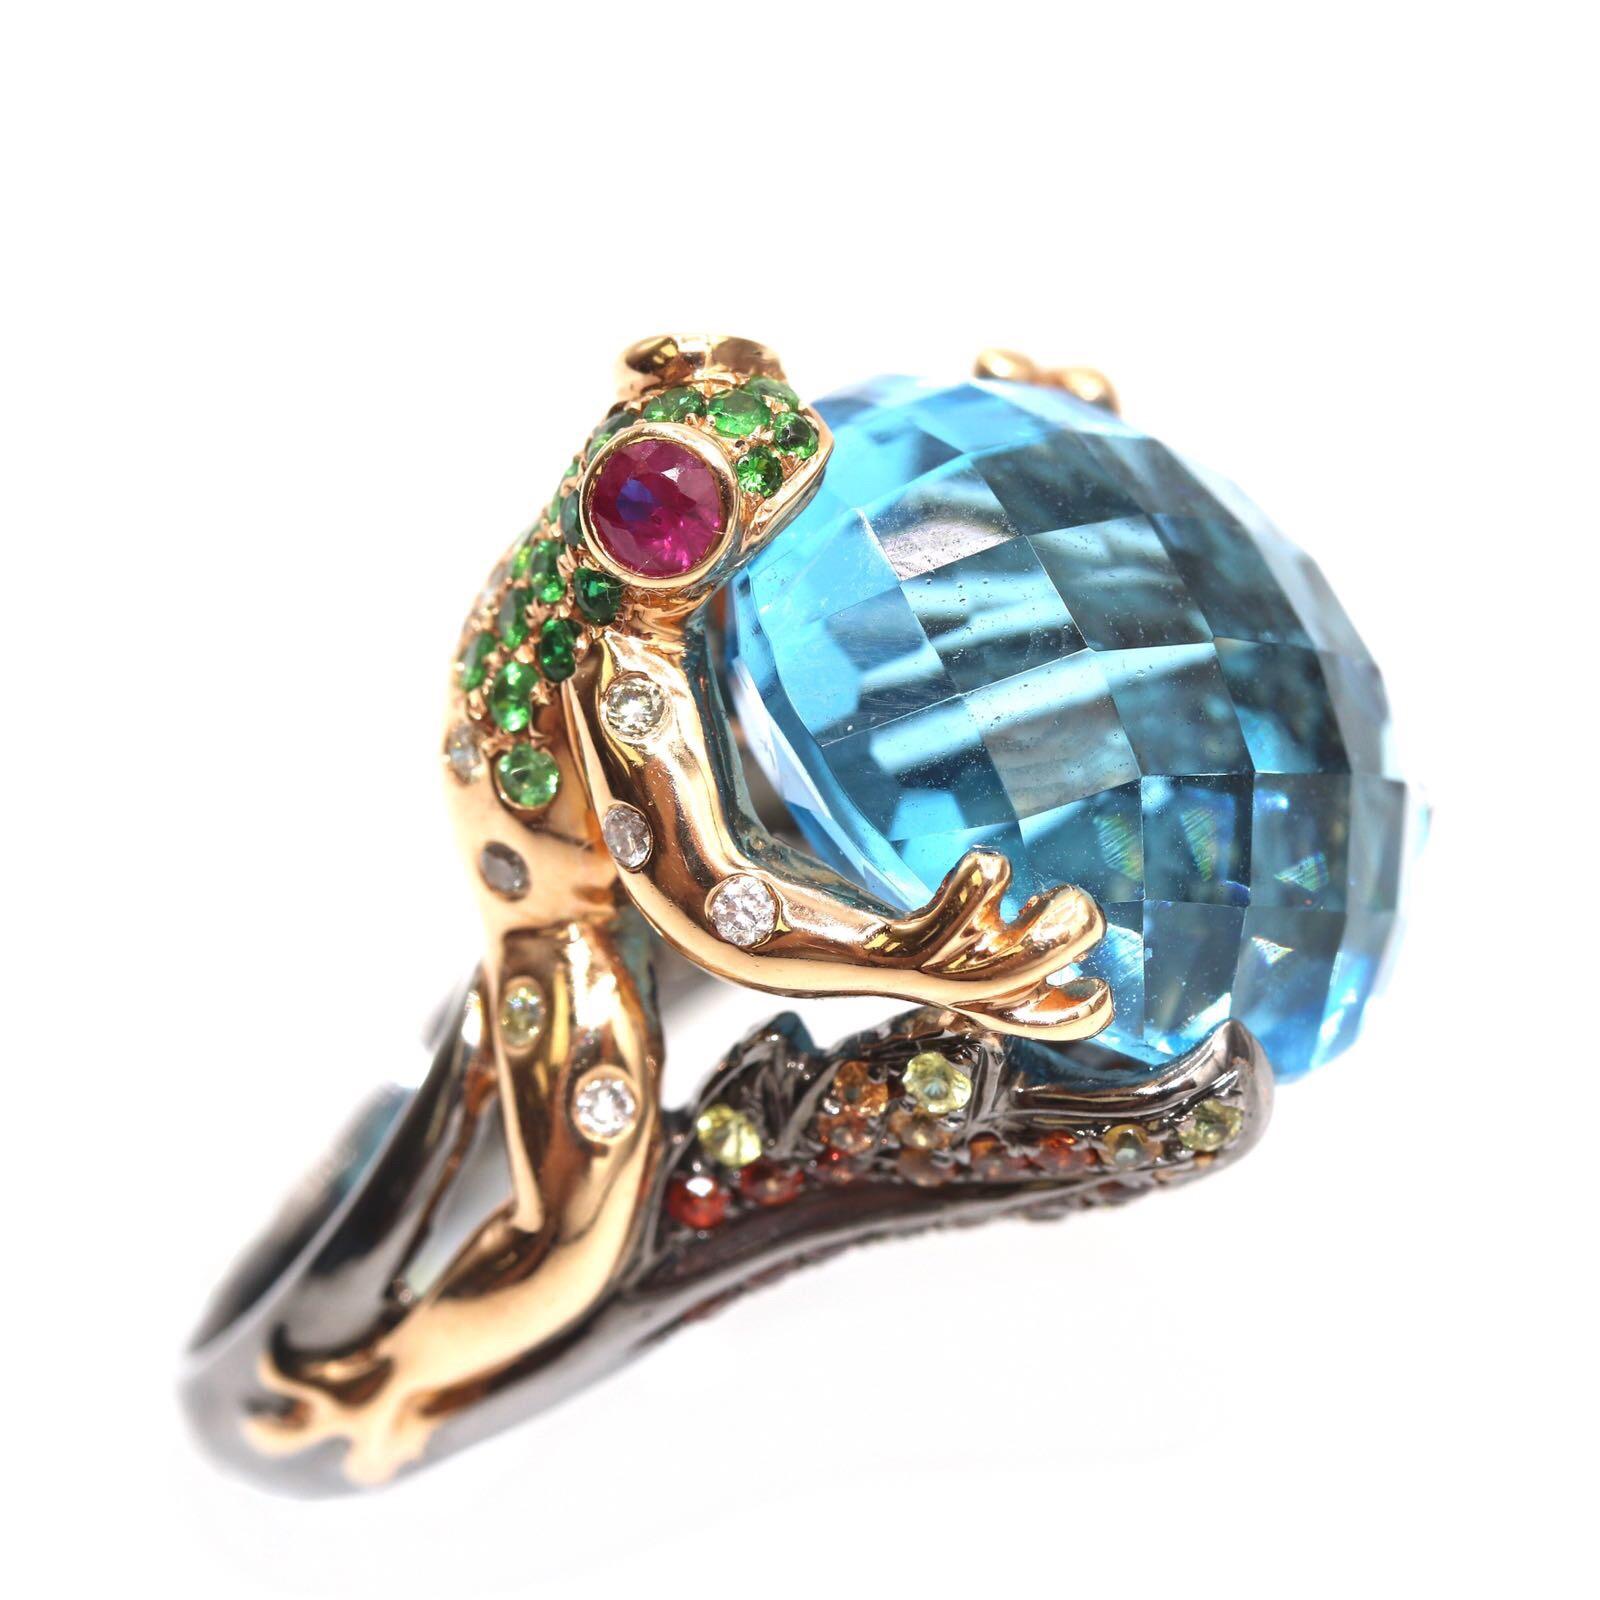 18K Beautiful Frog Ring with Blue Topaz Center Stone , Fancy Dia & Multi Color Sapphires. Ring Size 6.5
21.86 ttw Blue Topaz Center Stone
1.08 ttw Multi Sapphire
0.20 ttw. Diamonds